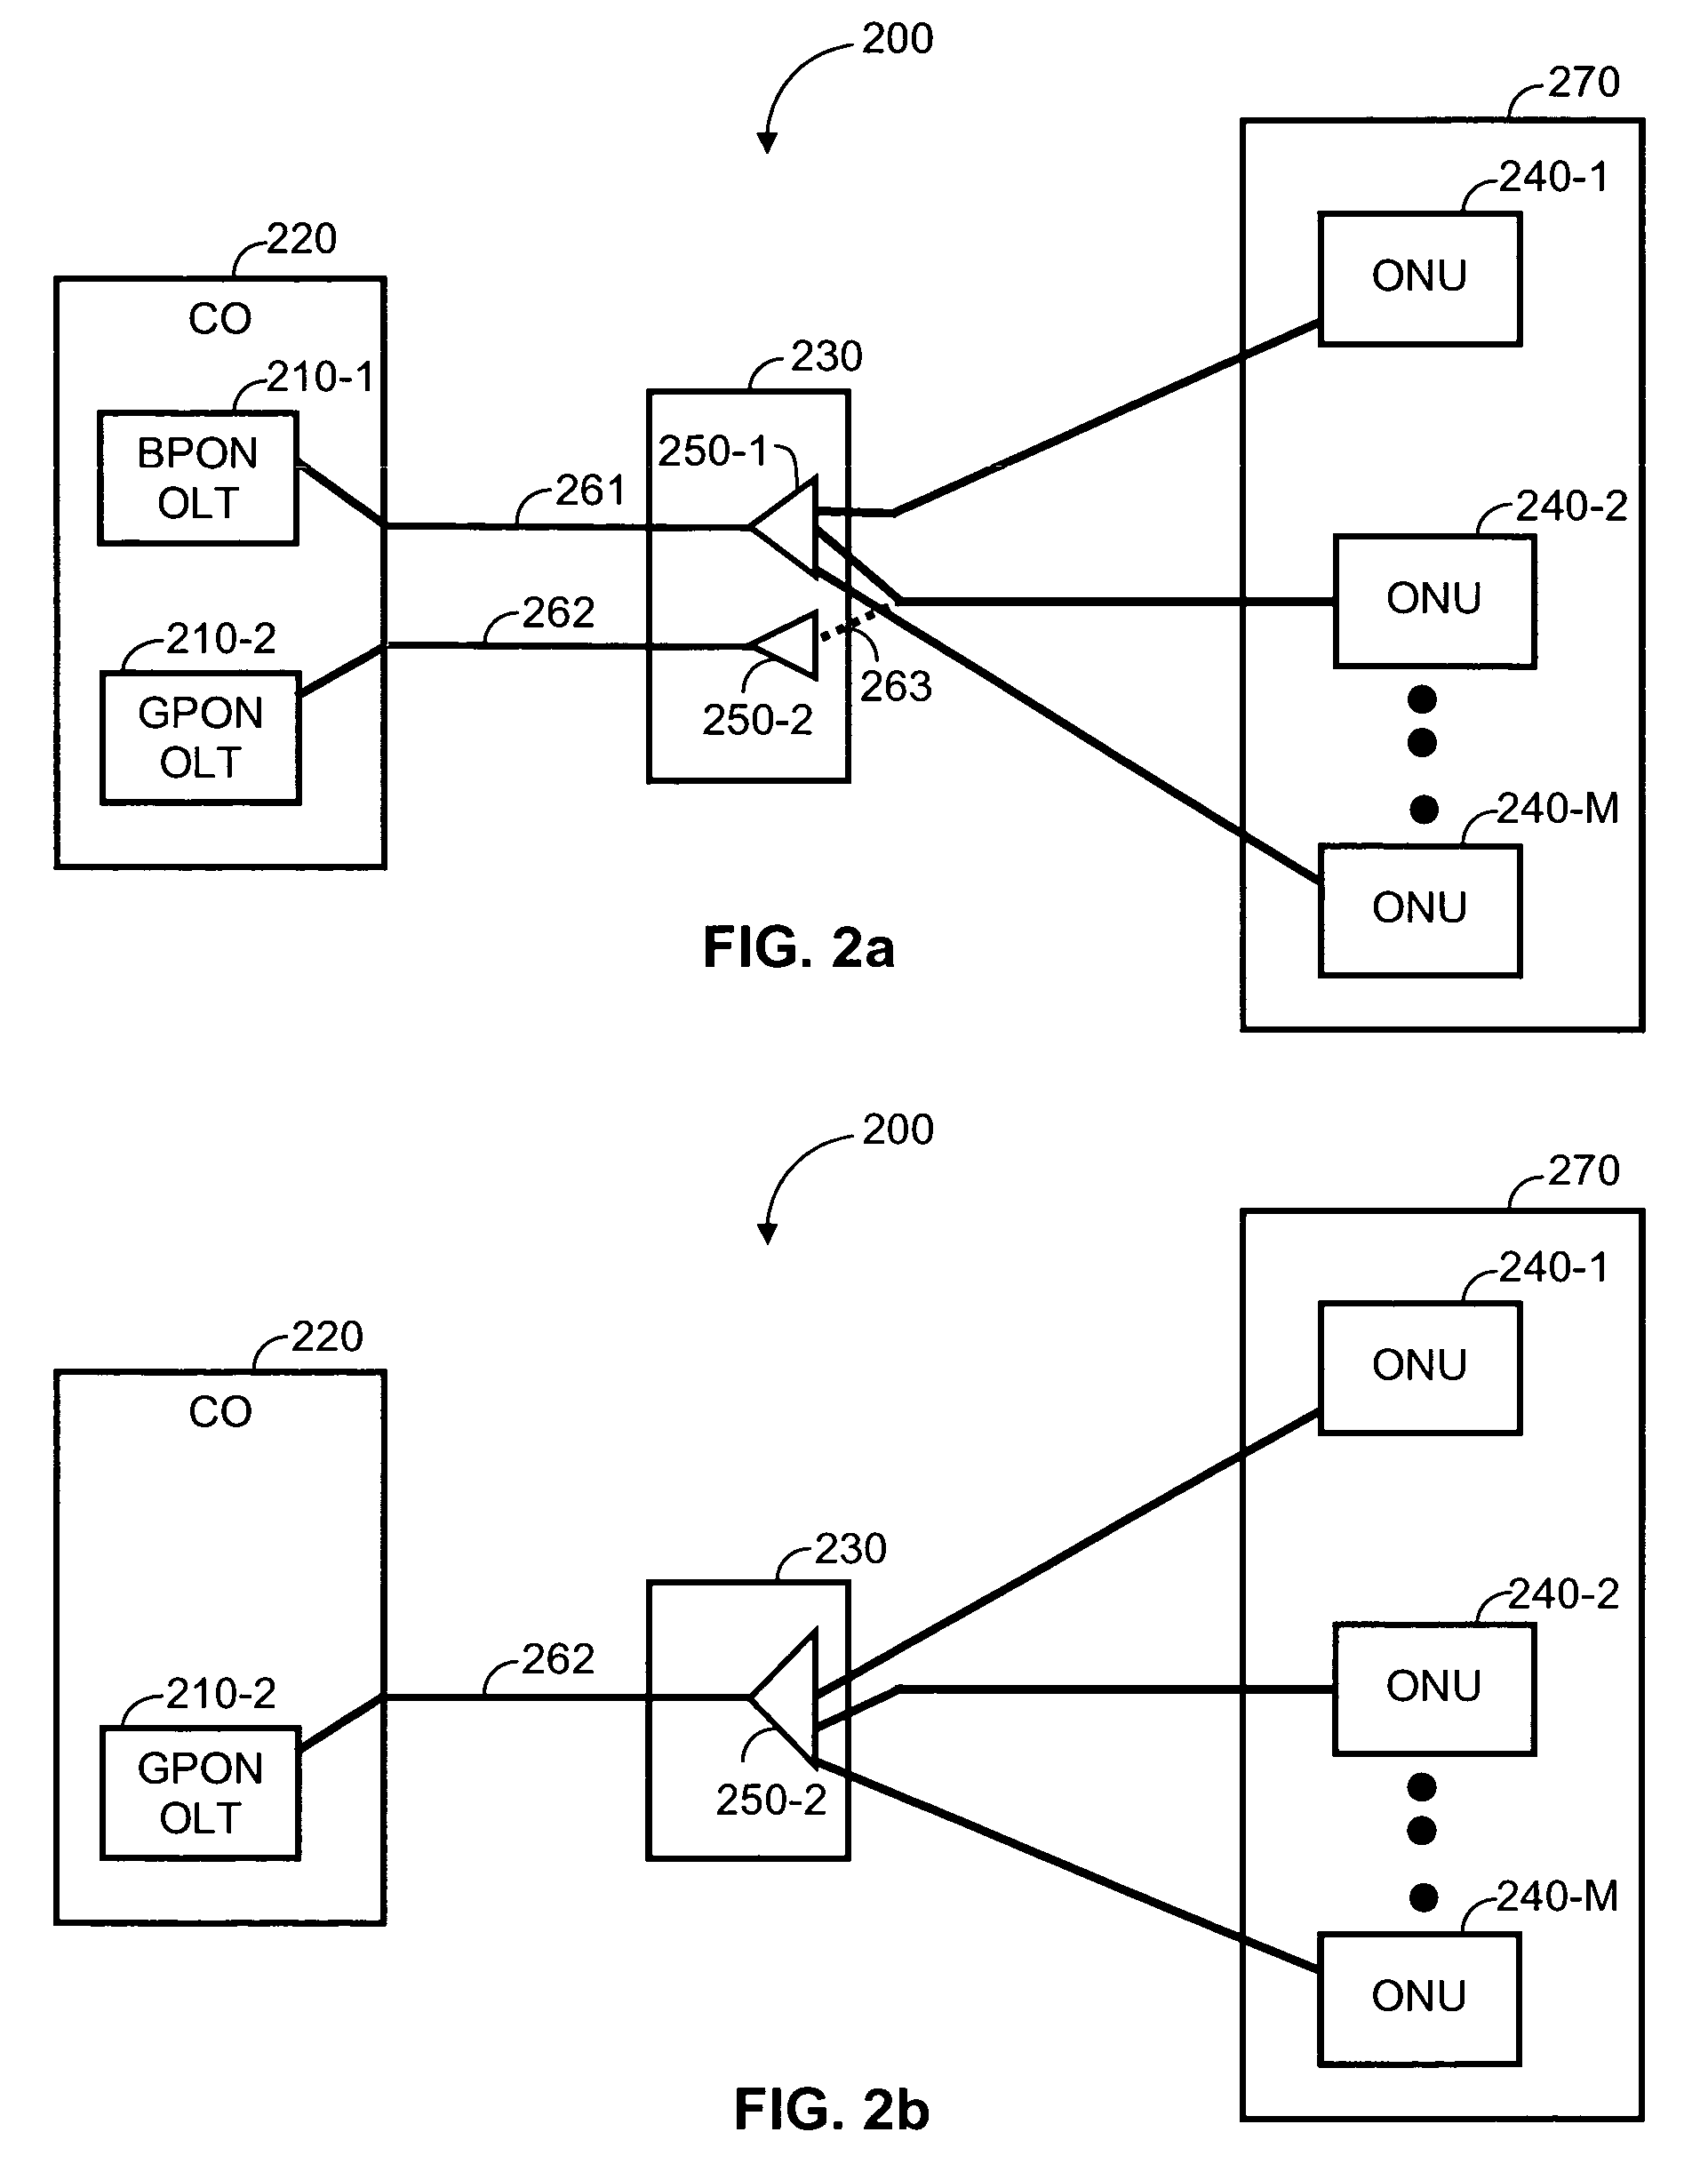 Method and apparatus for automatically upgrading passive optical networks (PONs)